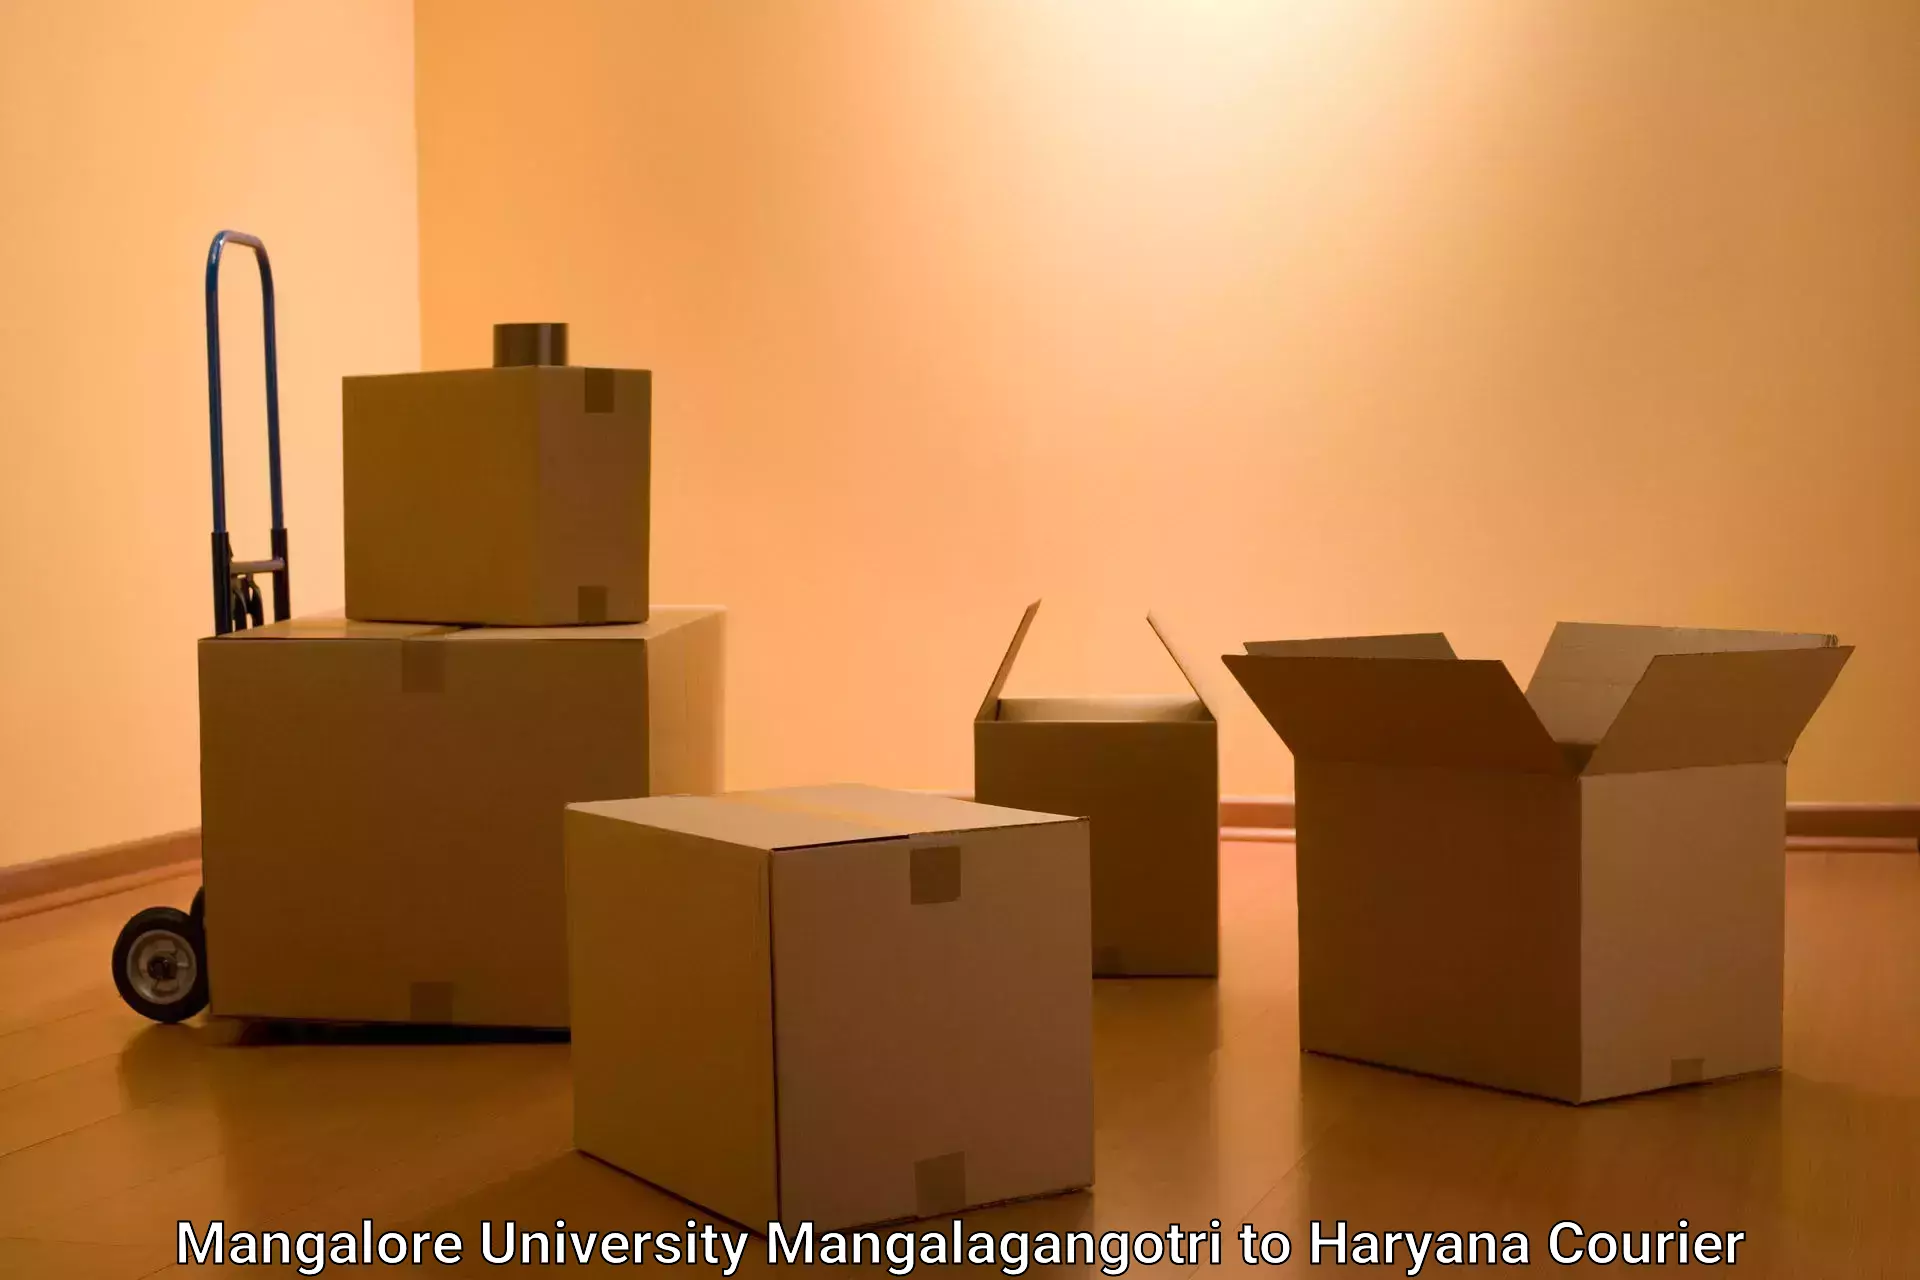 Easy access courier services Mangalore University Mangalagangotri to Odhan